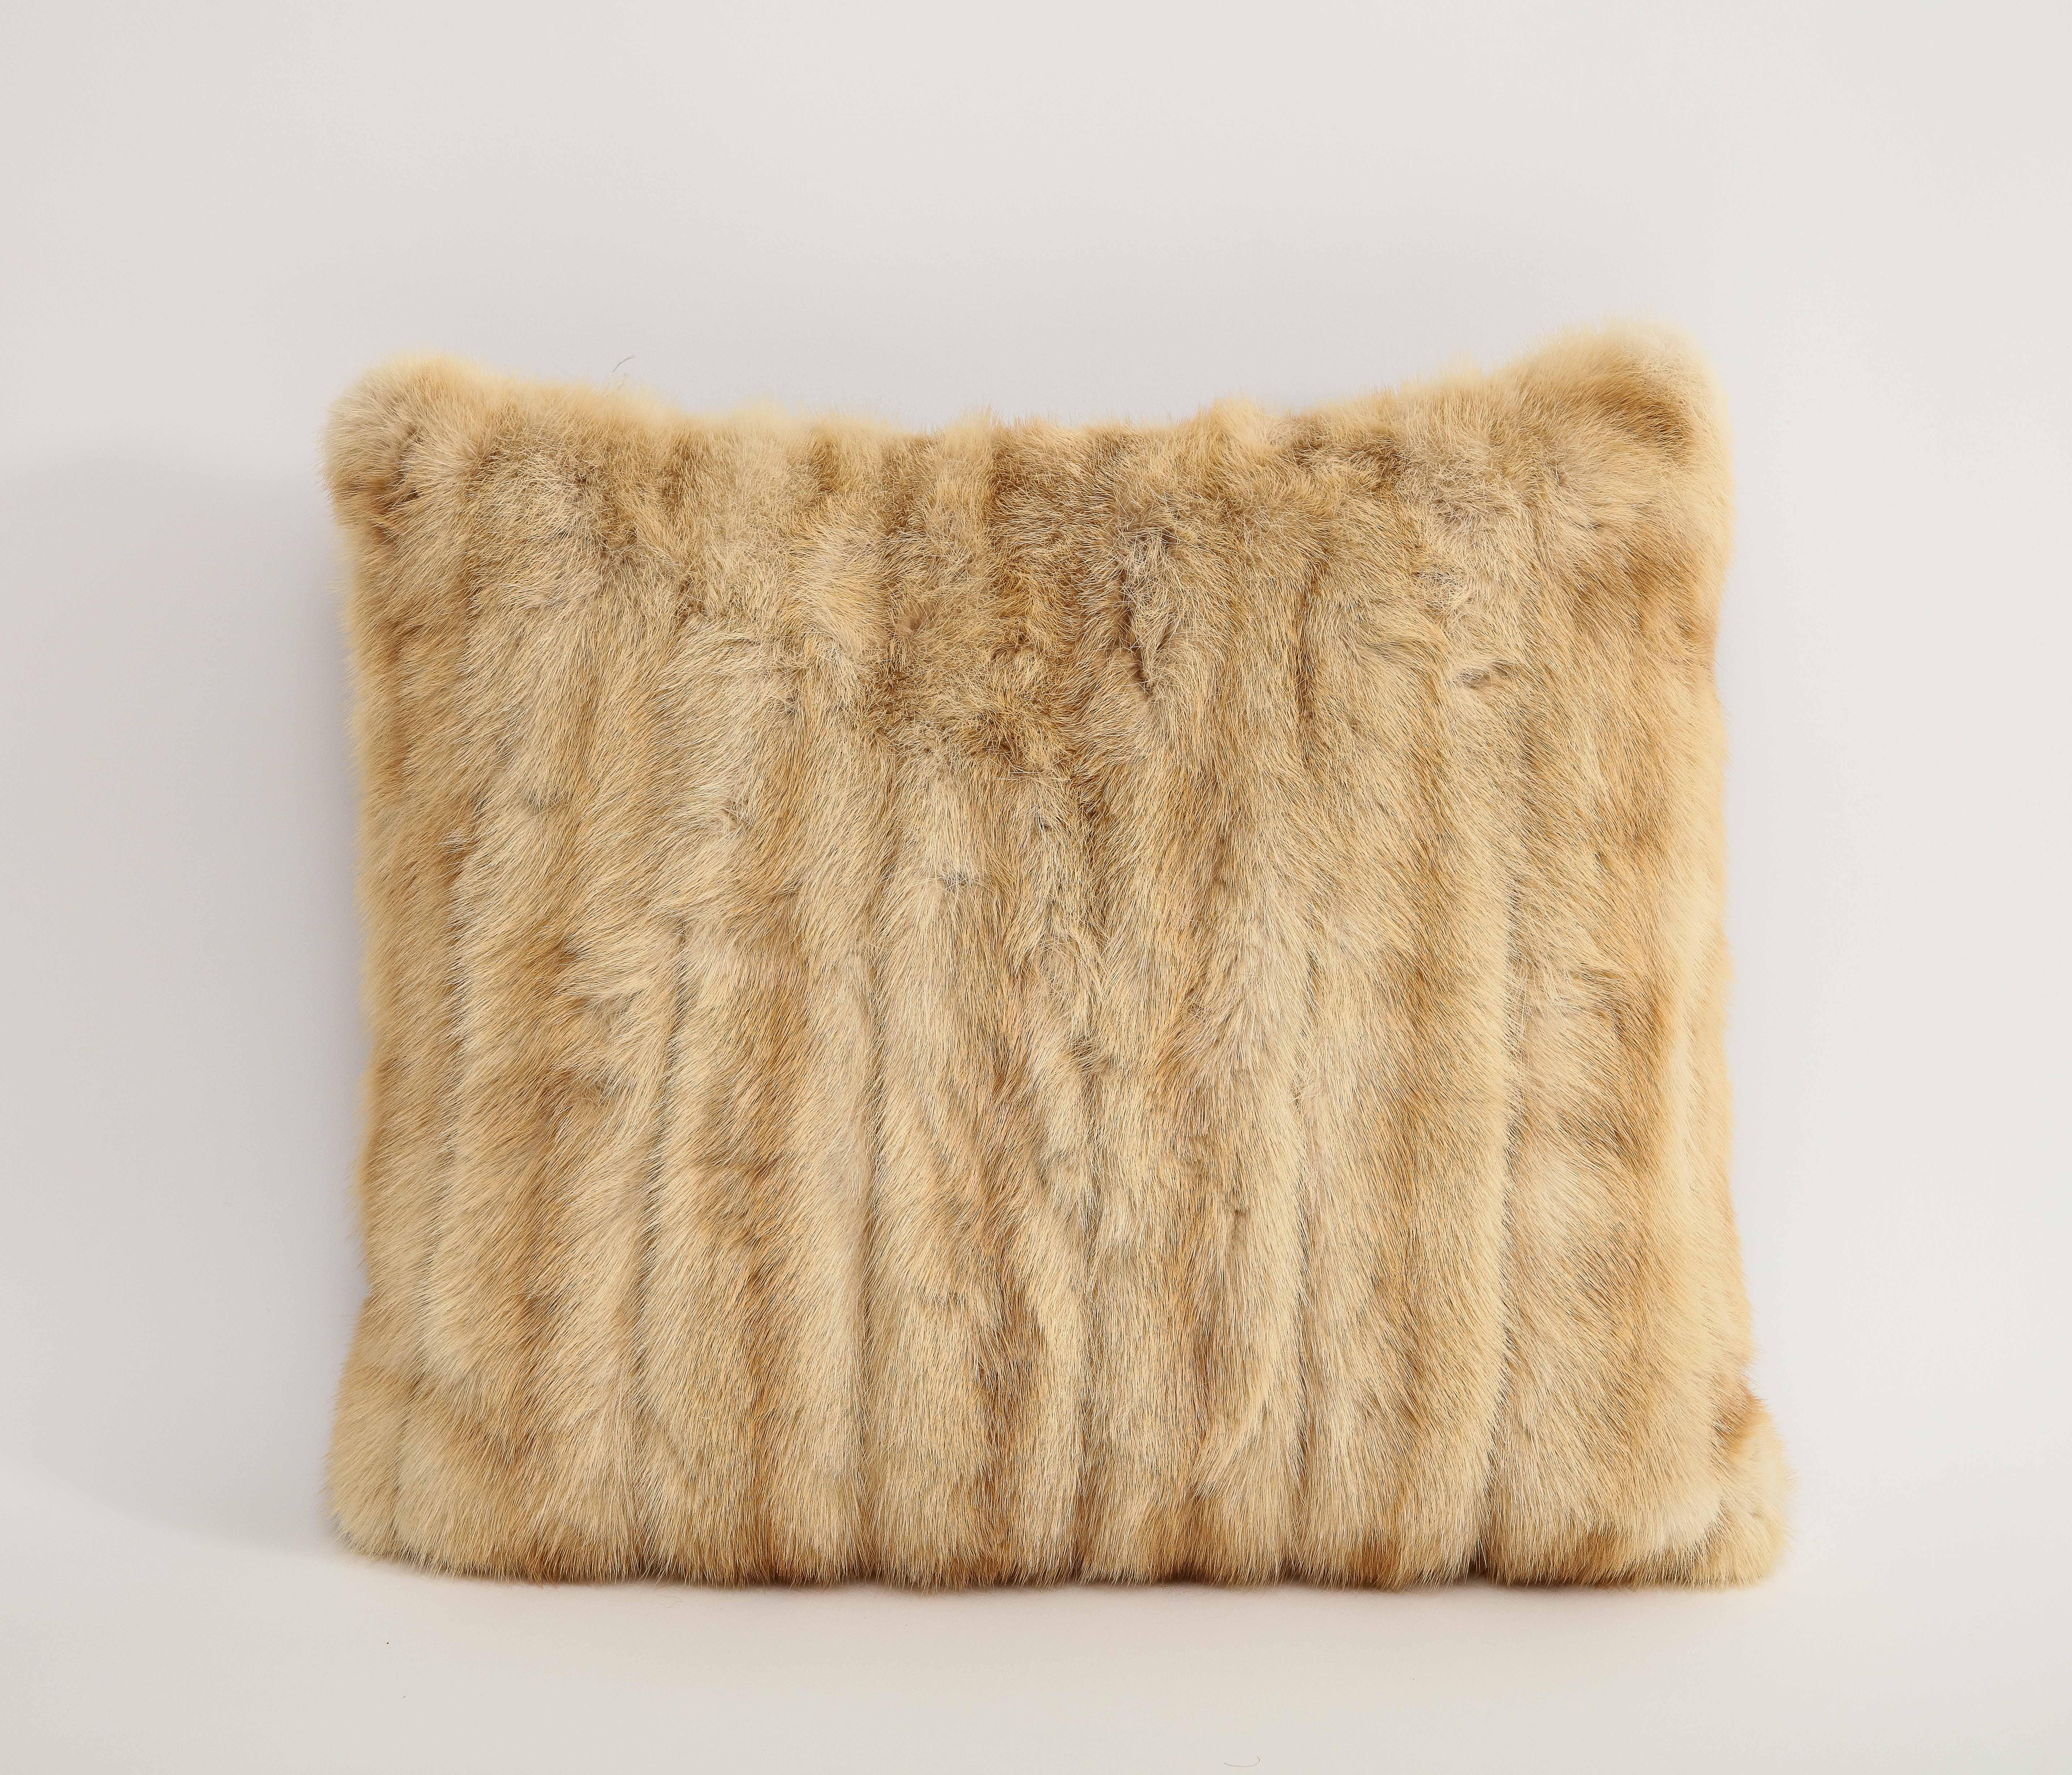 Decorative throw pillow with natural blonde mink fur, brown velvet on the reverse. 